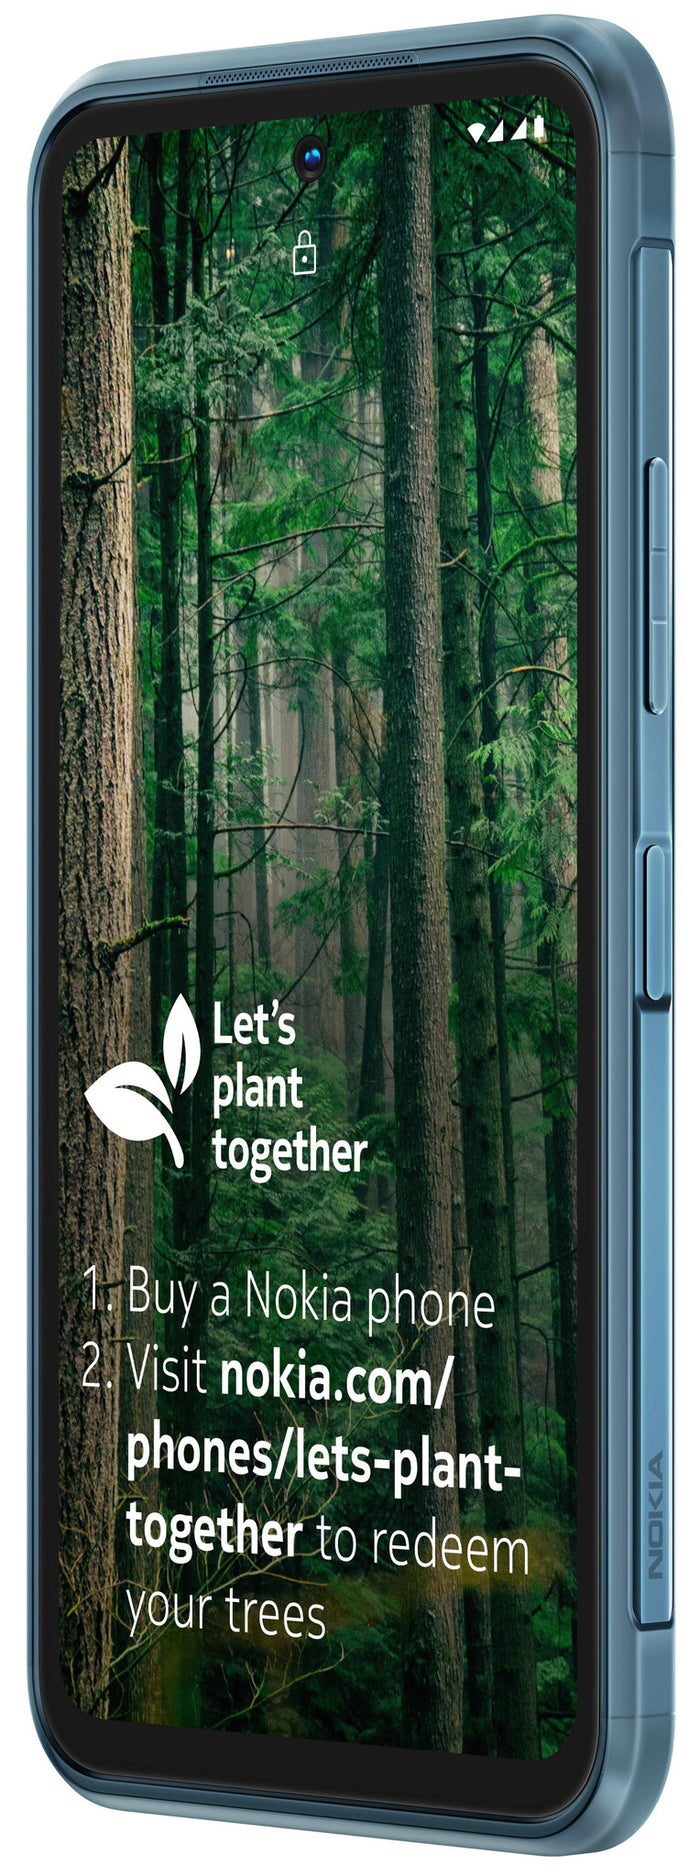 Nokia X XR20 6.67 Inch Android UK SIM Free Smartphone with 5G Connectivity - 4 GB RAM and 64 GB Storage (Dual SIM) - Ultra Blue Nokia